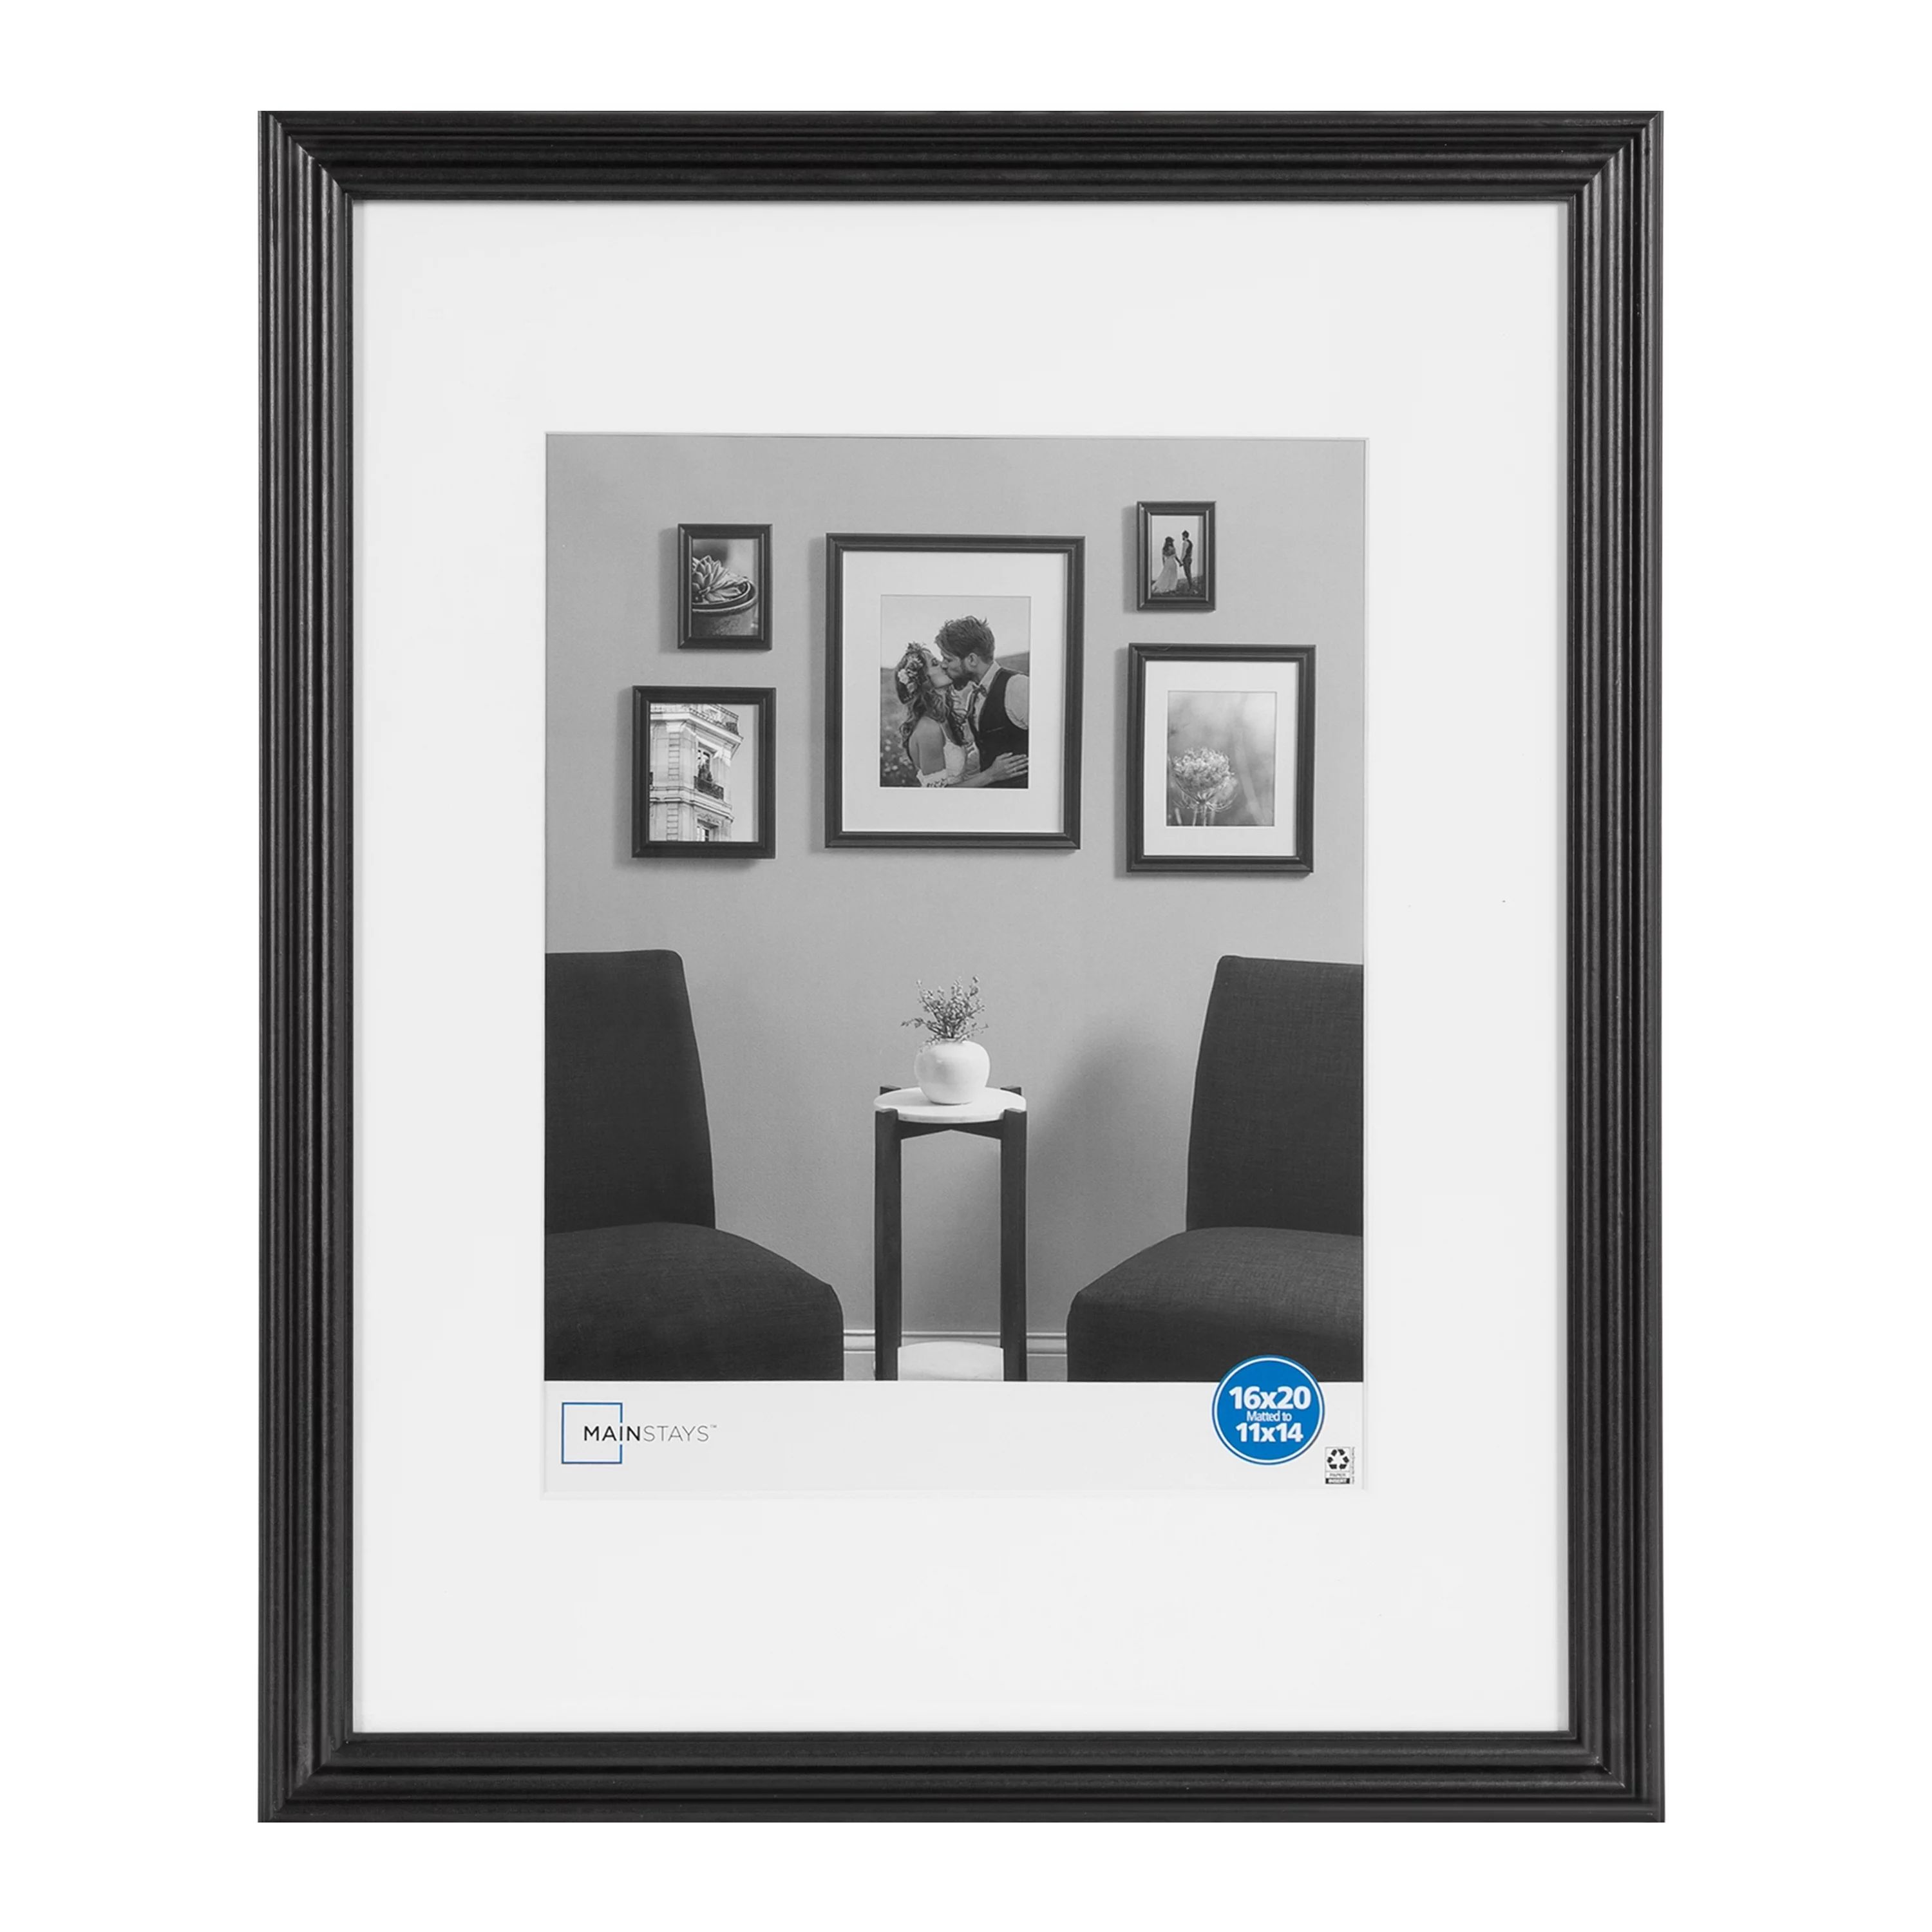 Mainstays 16x20 Matted to 11x14 Traditional Gallery Wall Picture Frame, Black | Walmart (US)